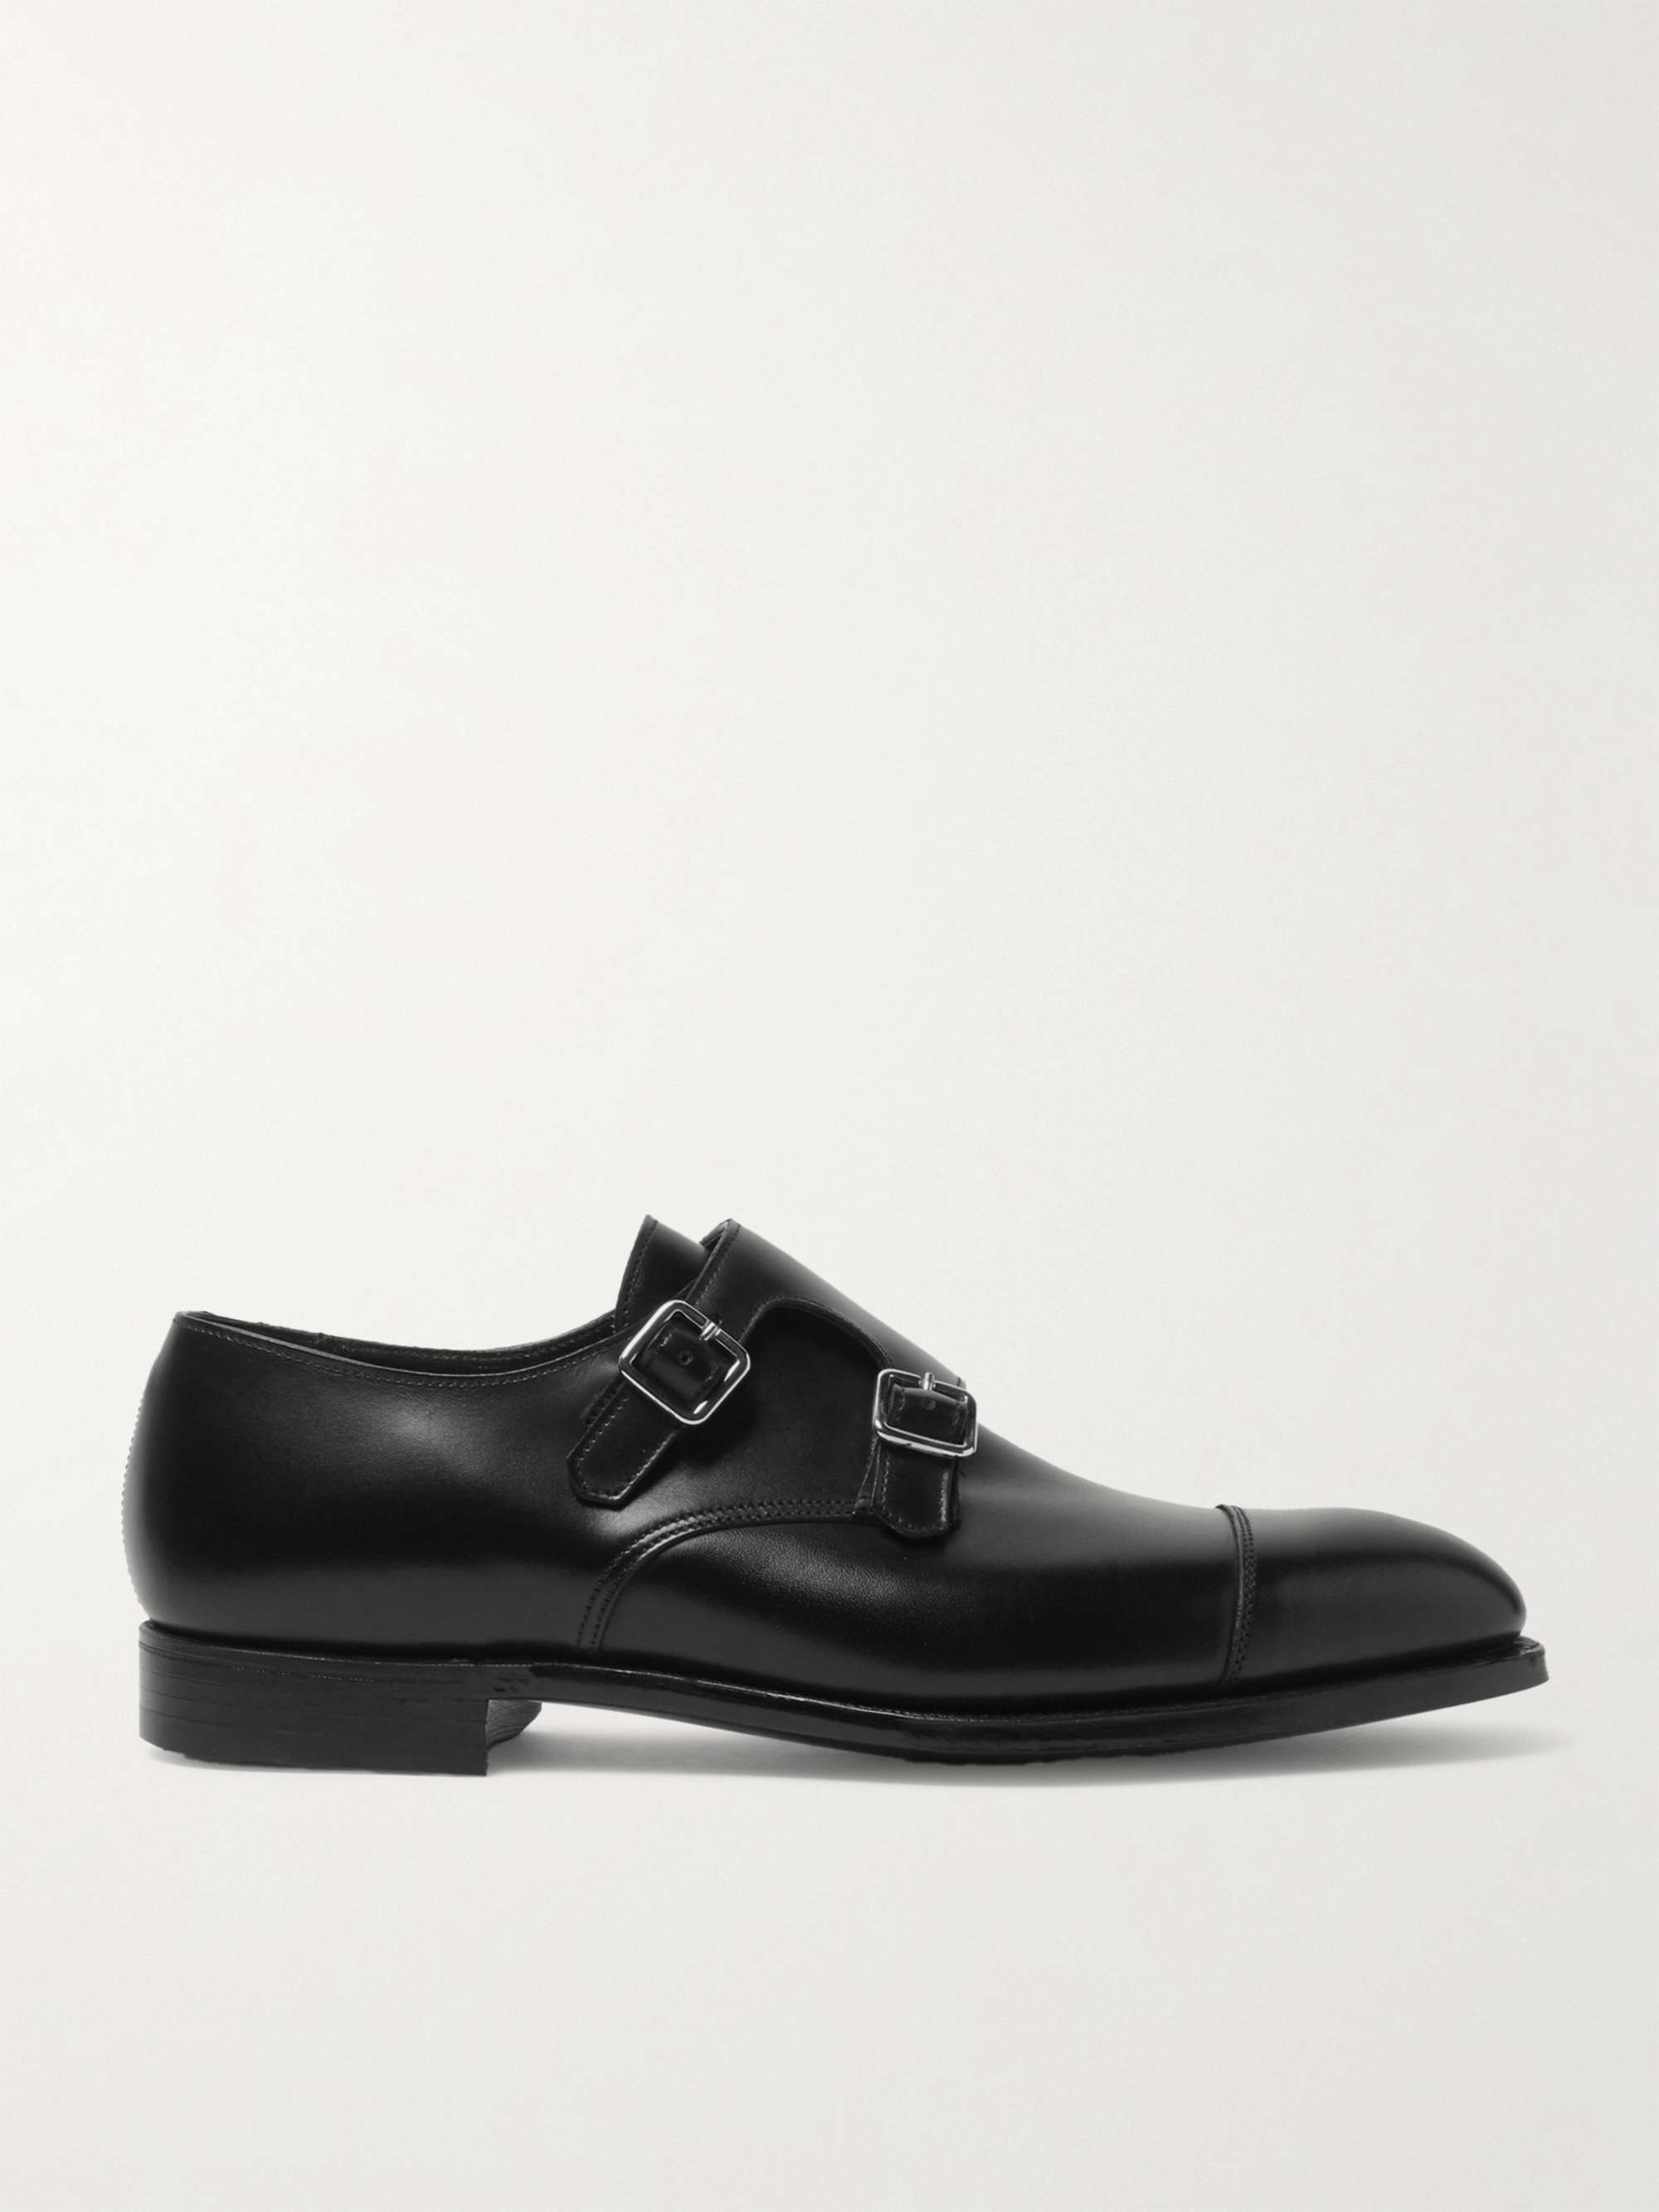 GEORGE CLEVERLEY Thomas Cap-Toe Leather Monk-Strap Shoes for Men | MR PORTER